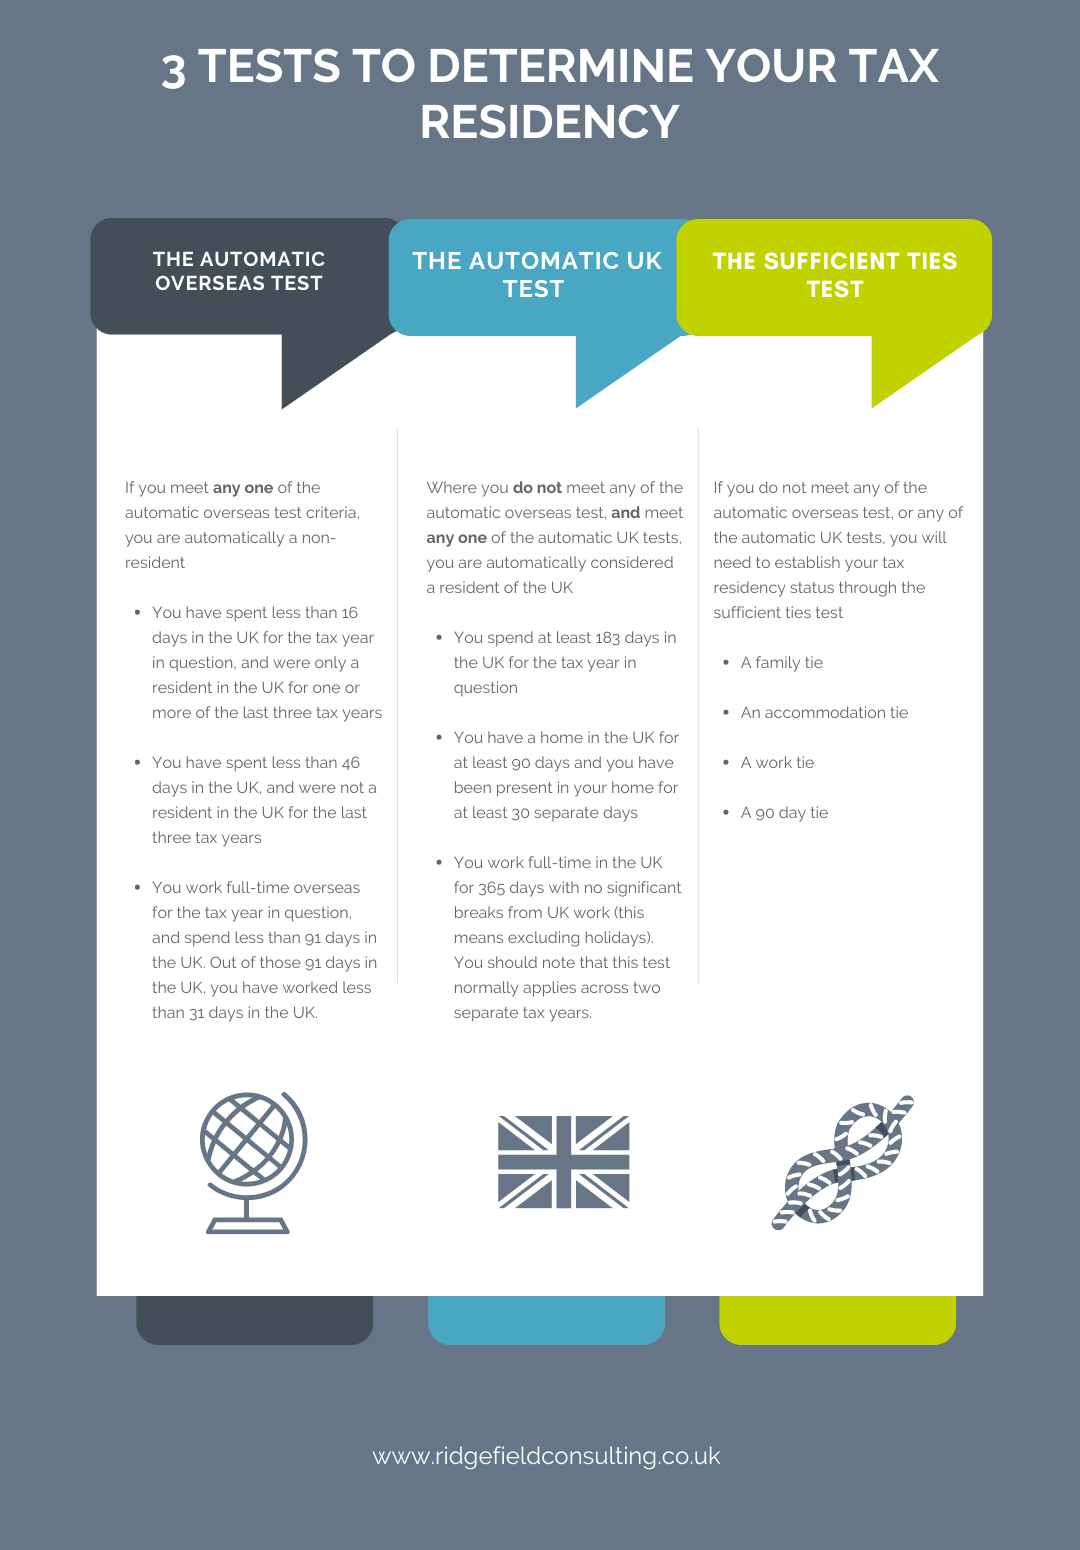 3 tests to determine your tax residency infographic